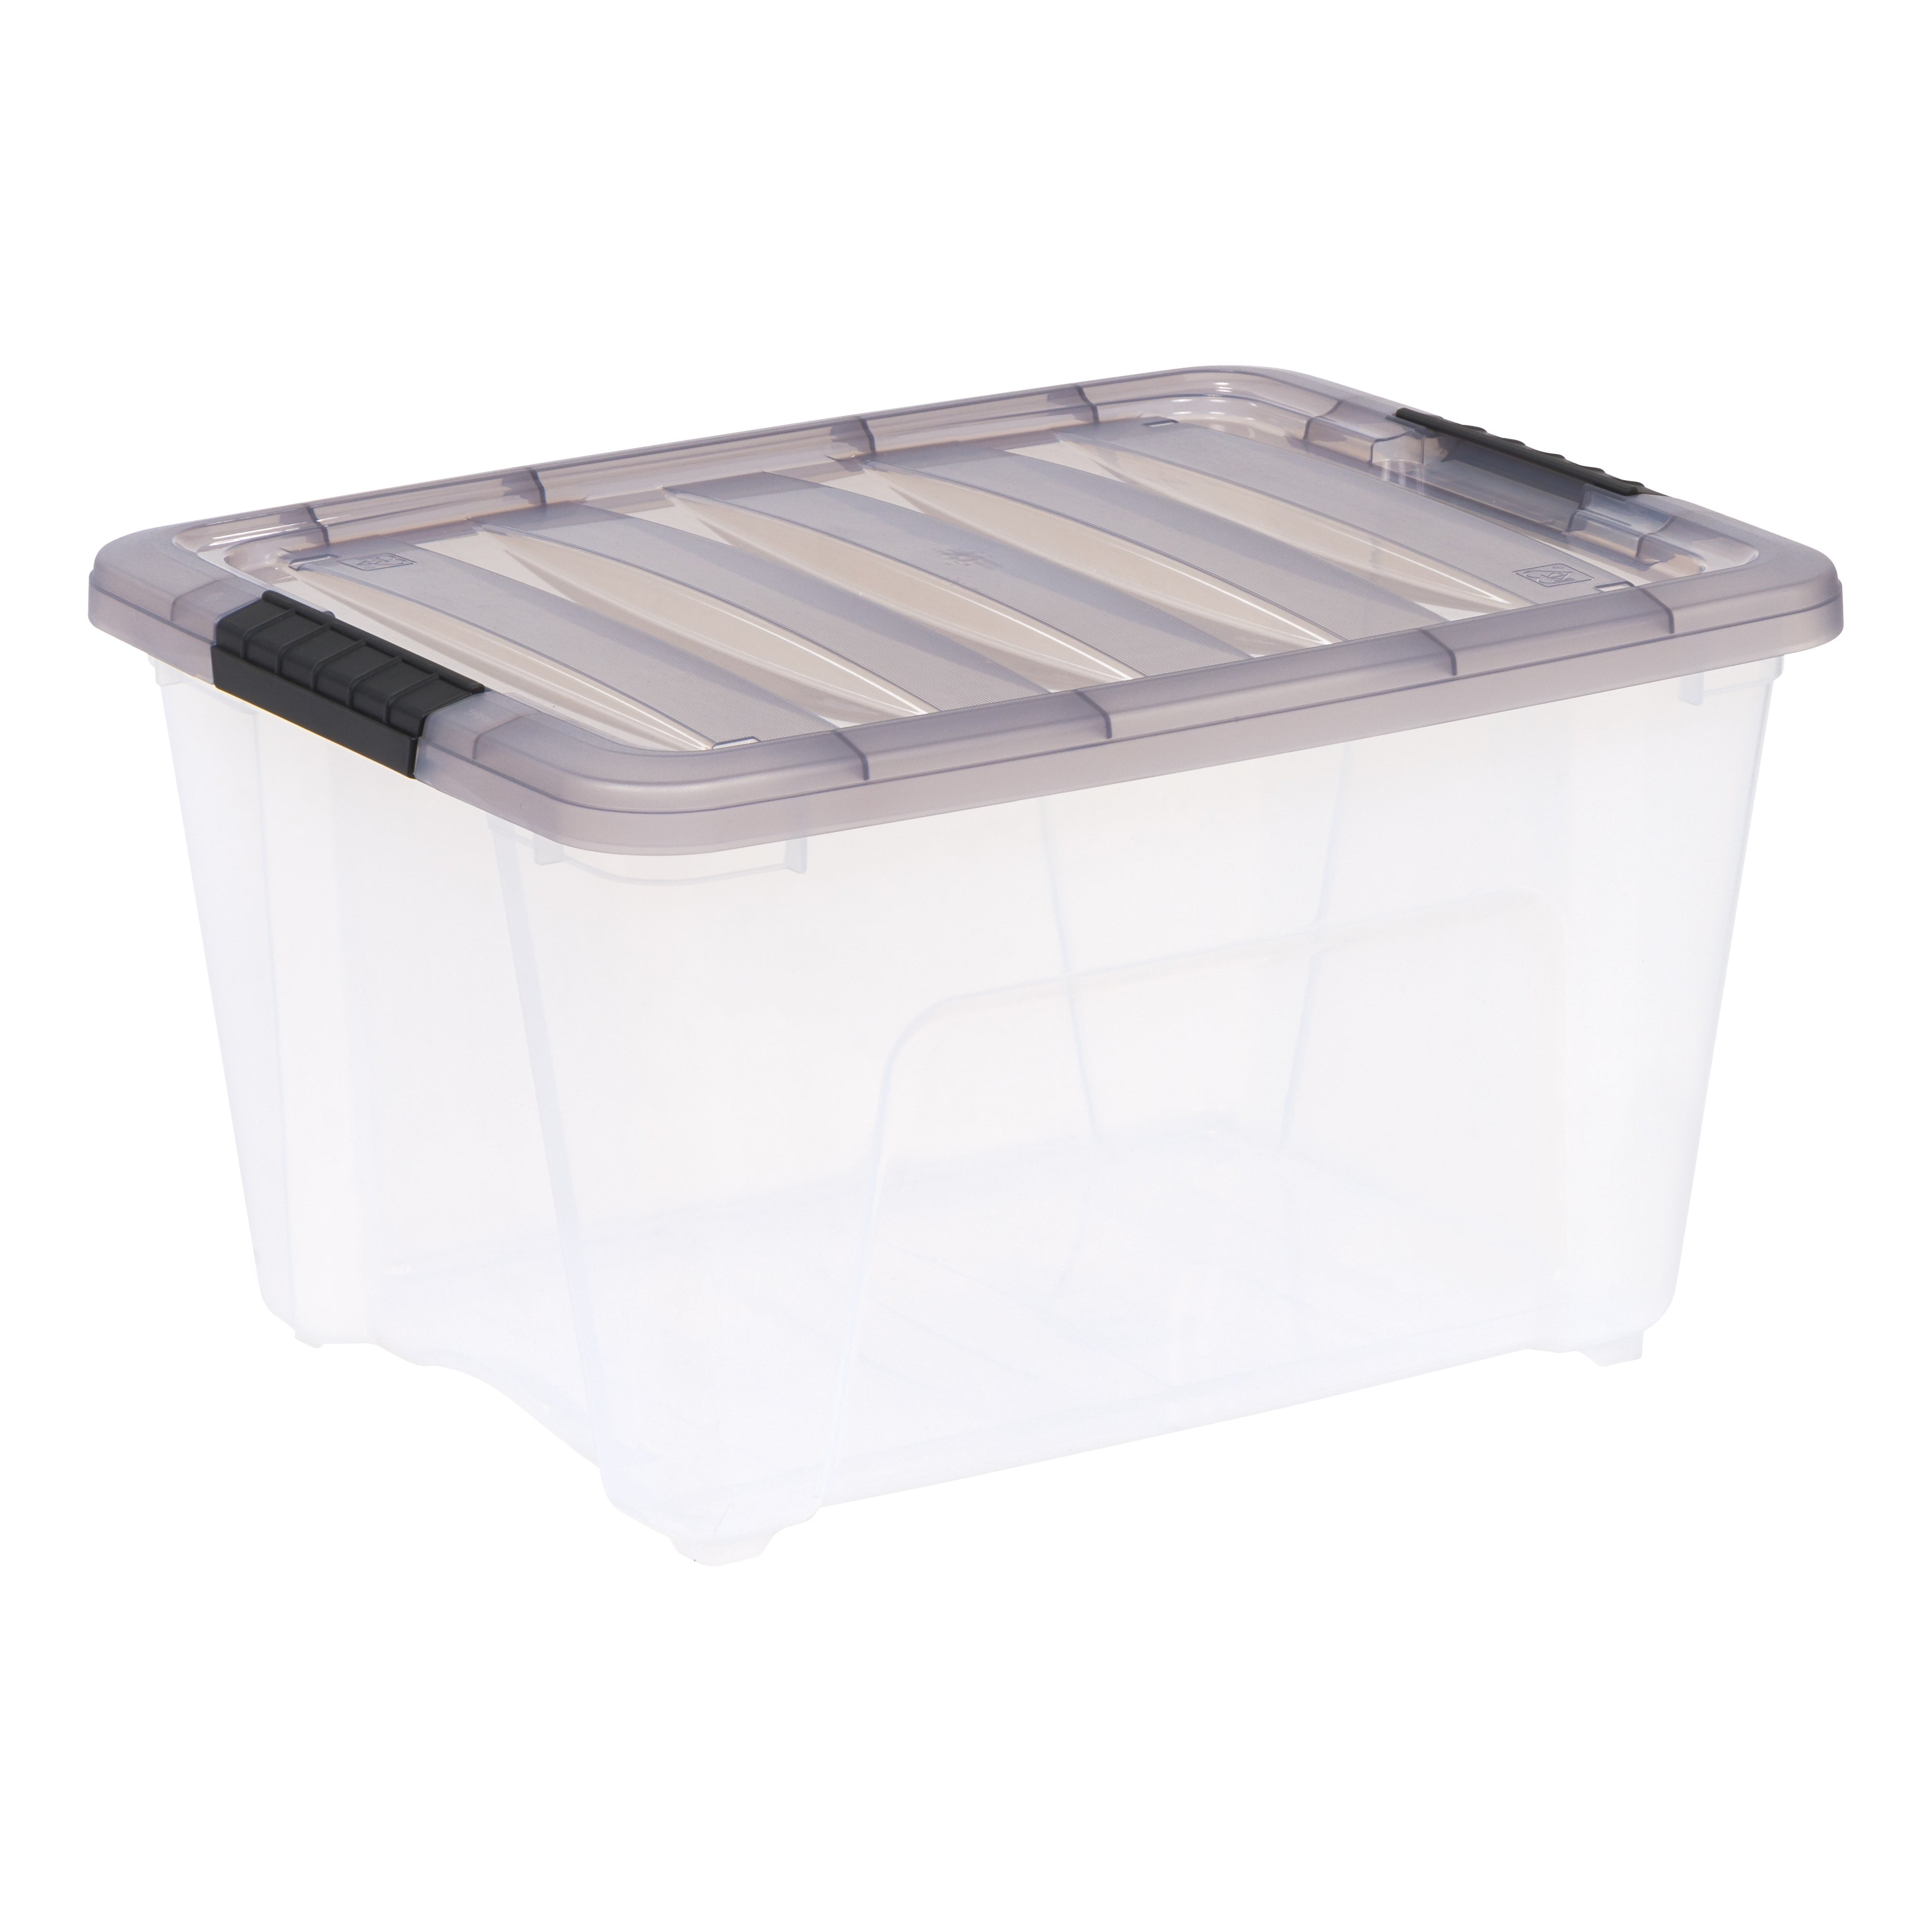 AVUX Stackable Storage Bin with Lid - A Green Colored 8.5 Gallon (32 l –  Avux Store